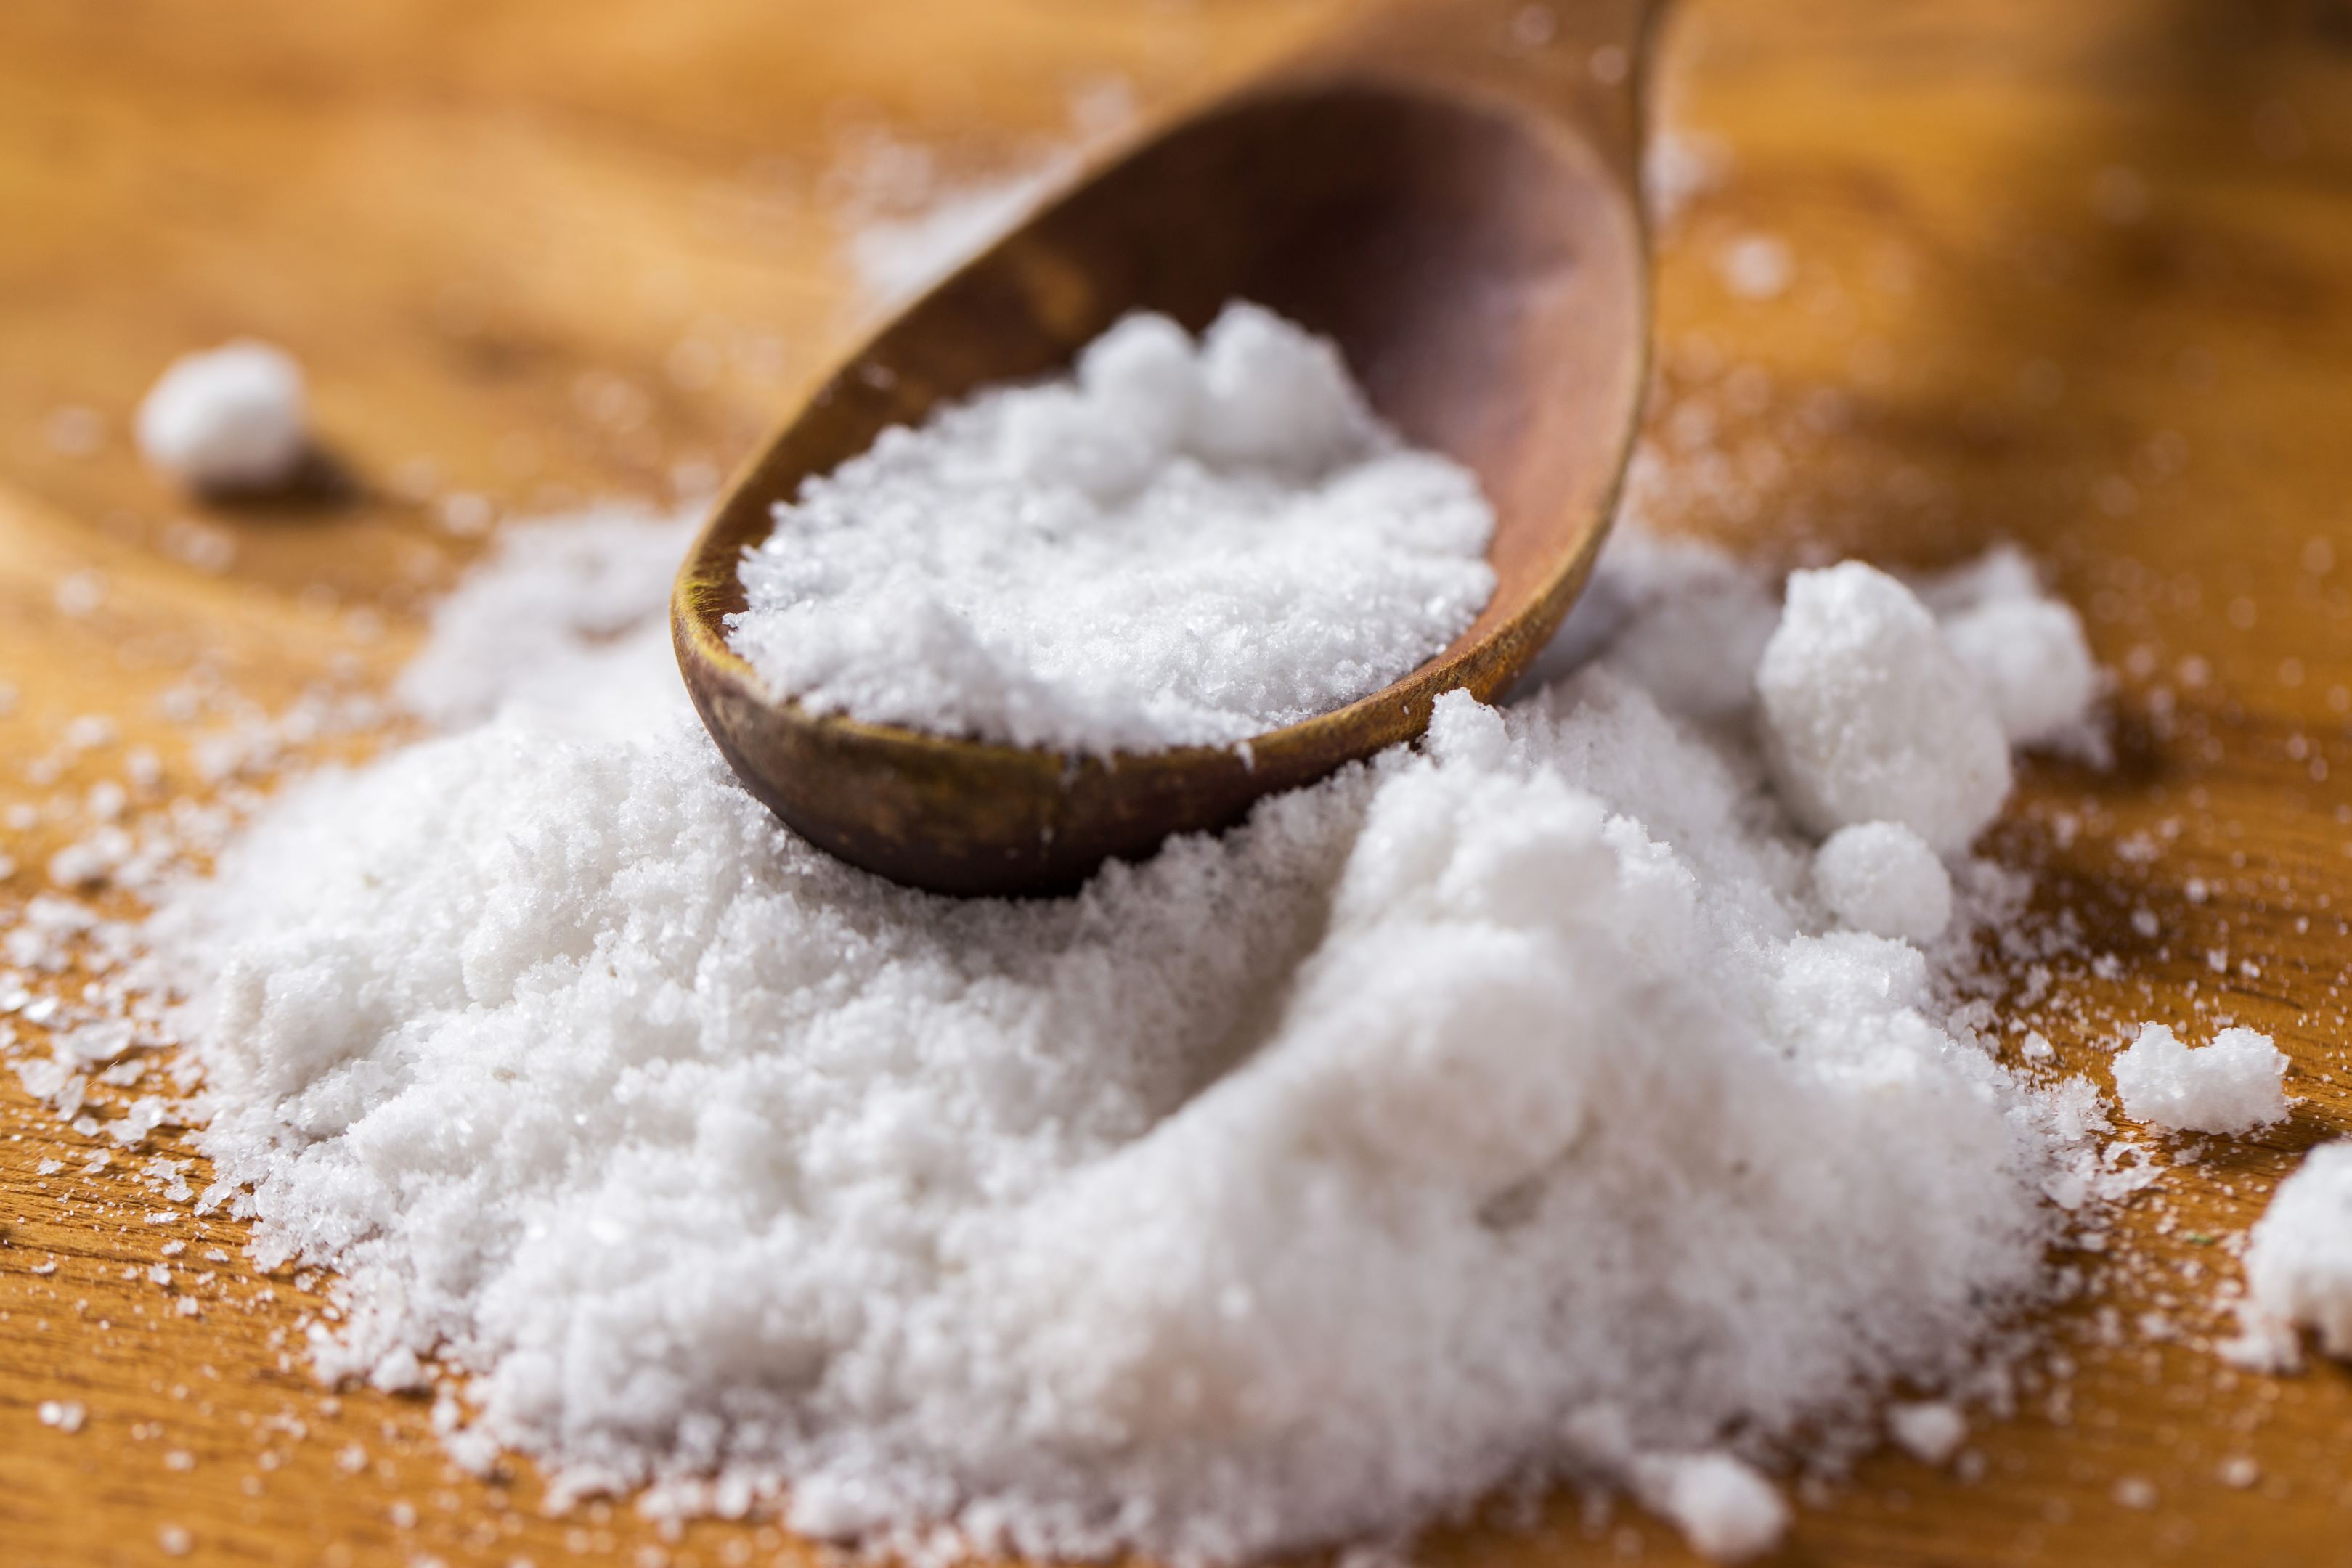 Salts are an integral part of human nutrition.